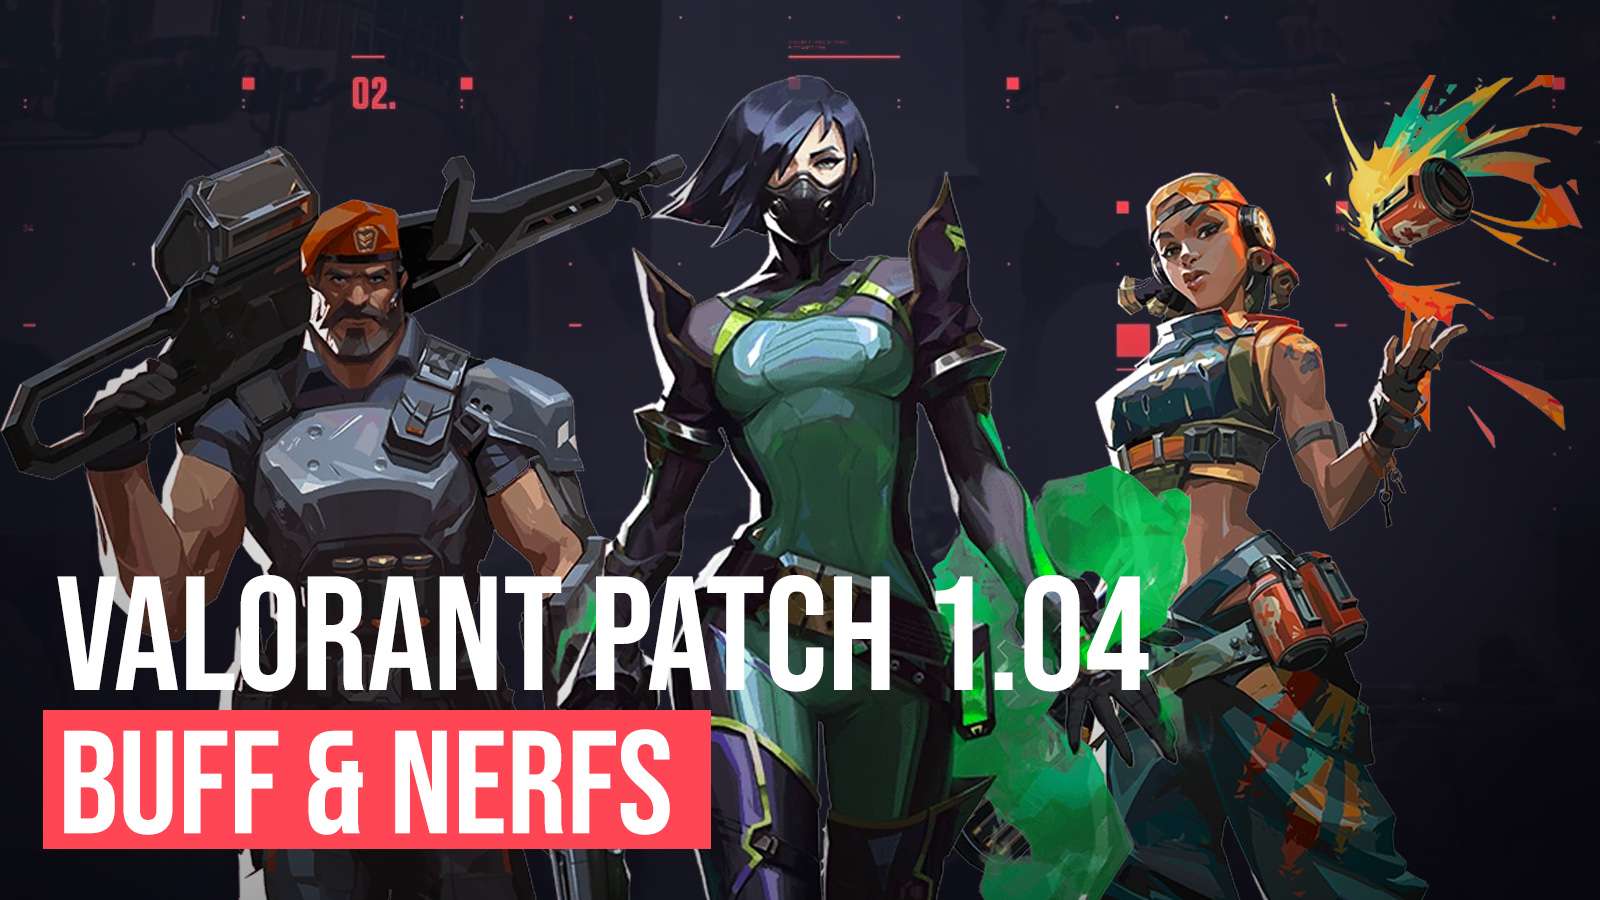 Valorant buffs and nerfs Patch 1.04